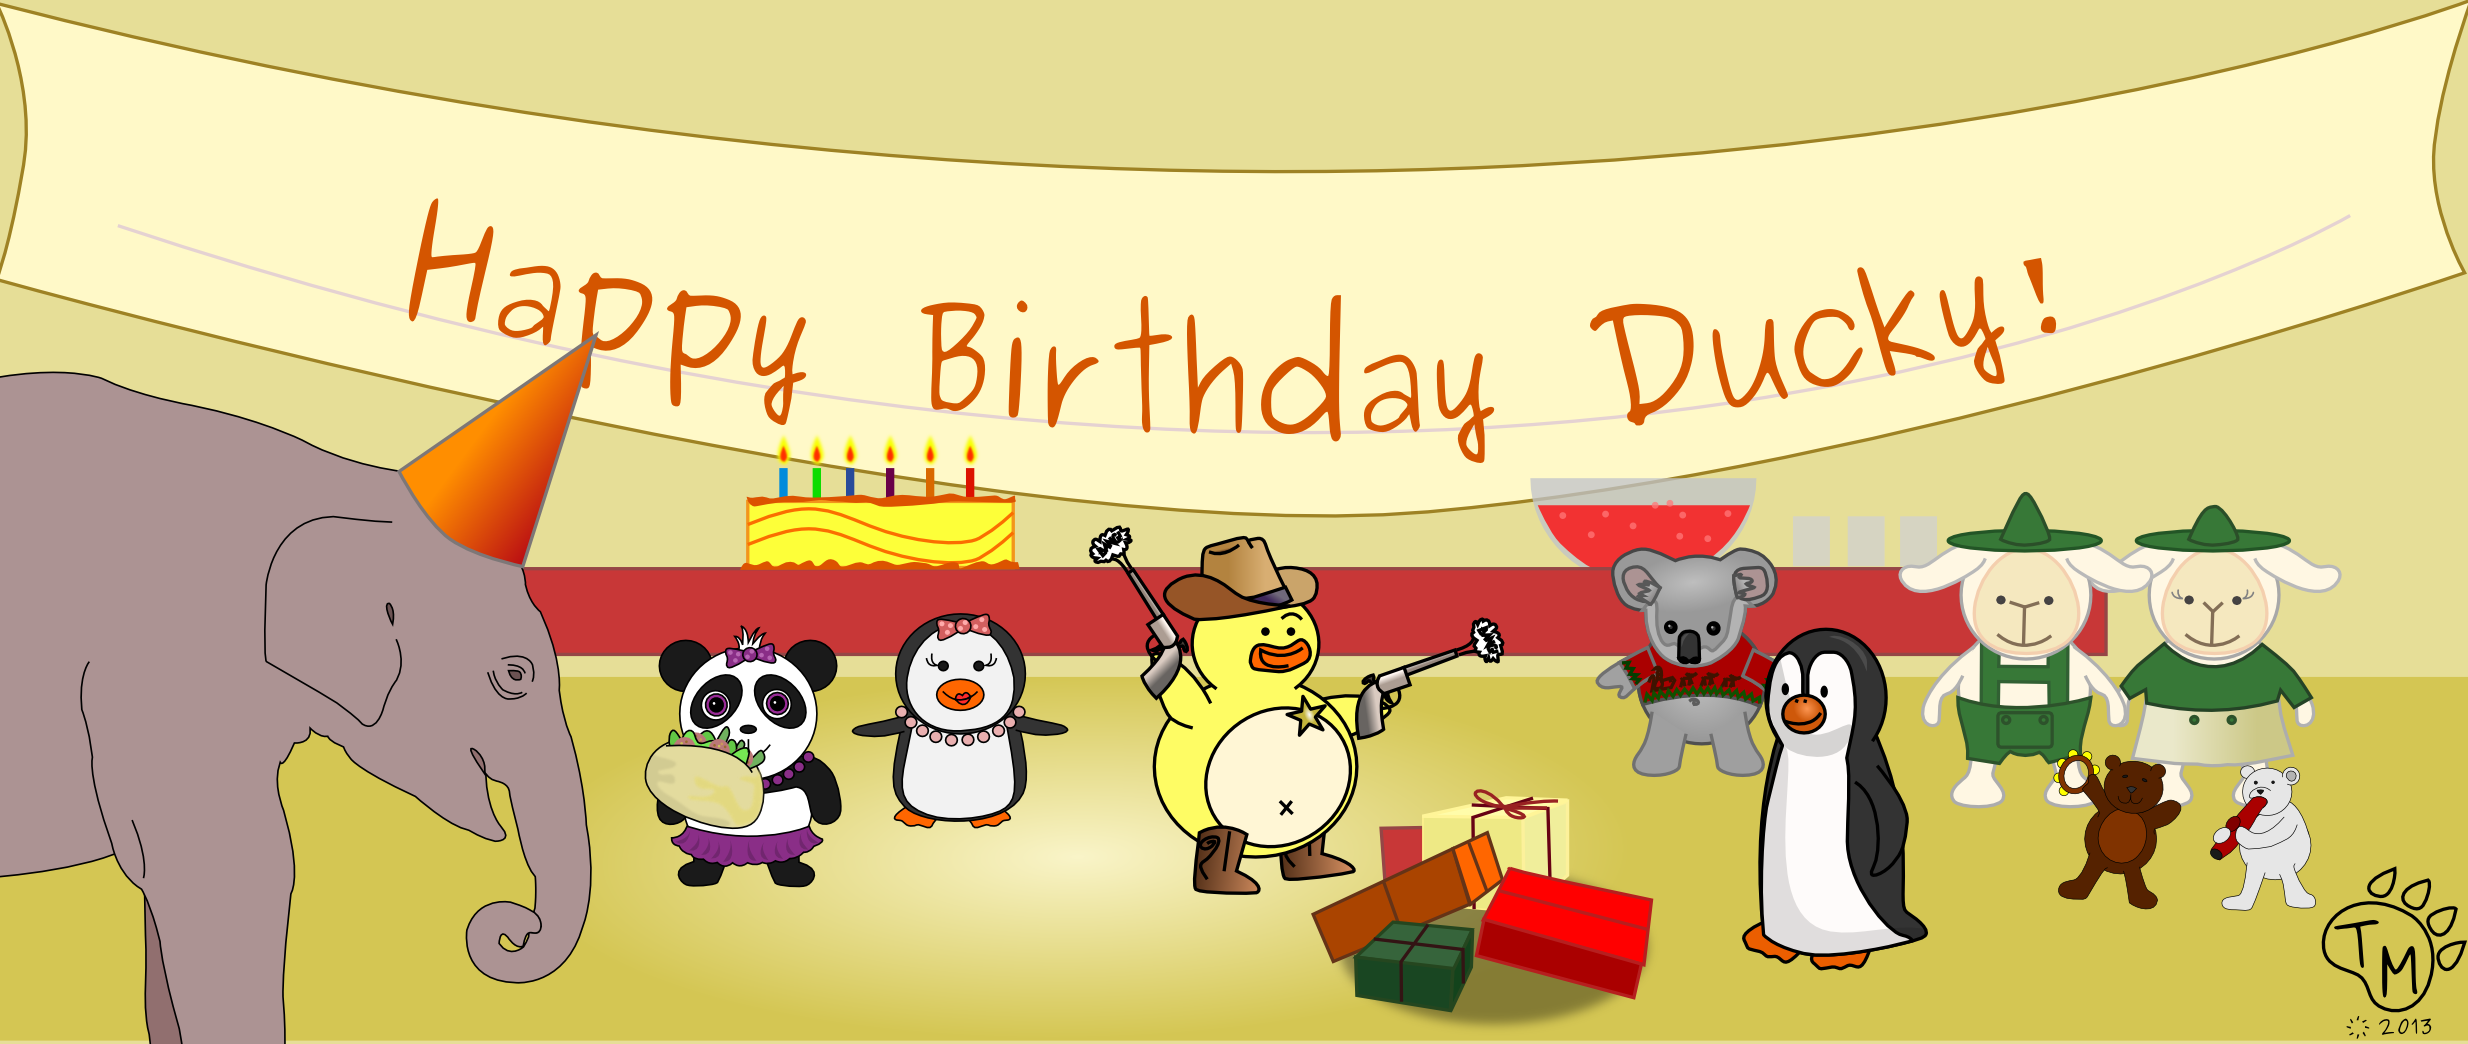 Image result for happy birthday ducky